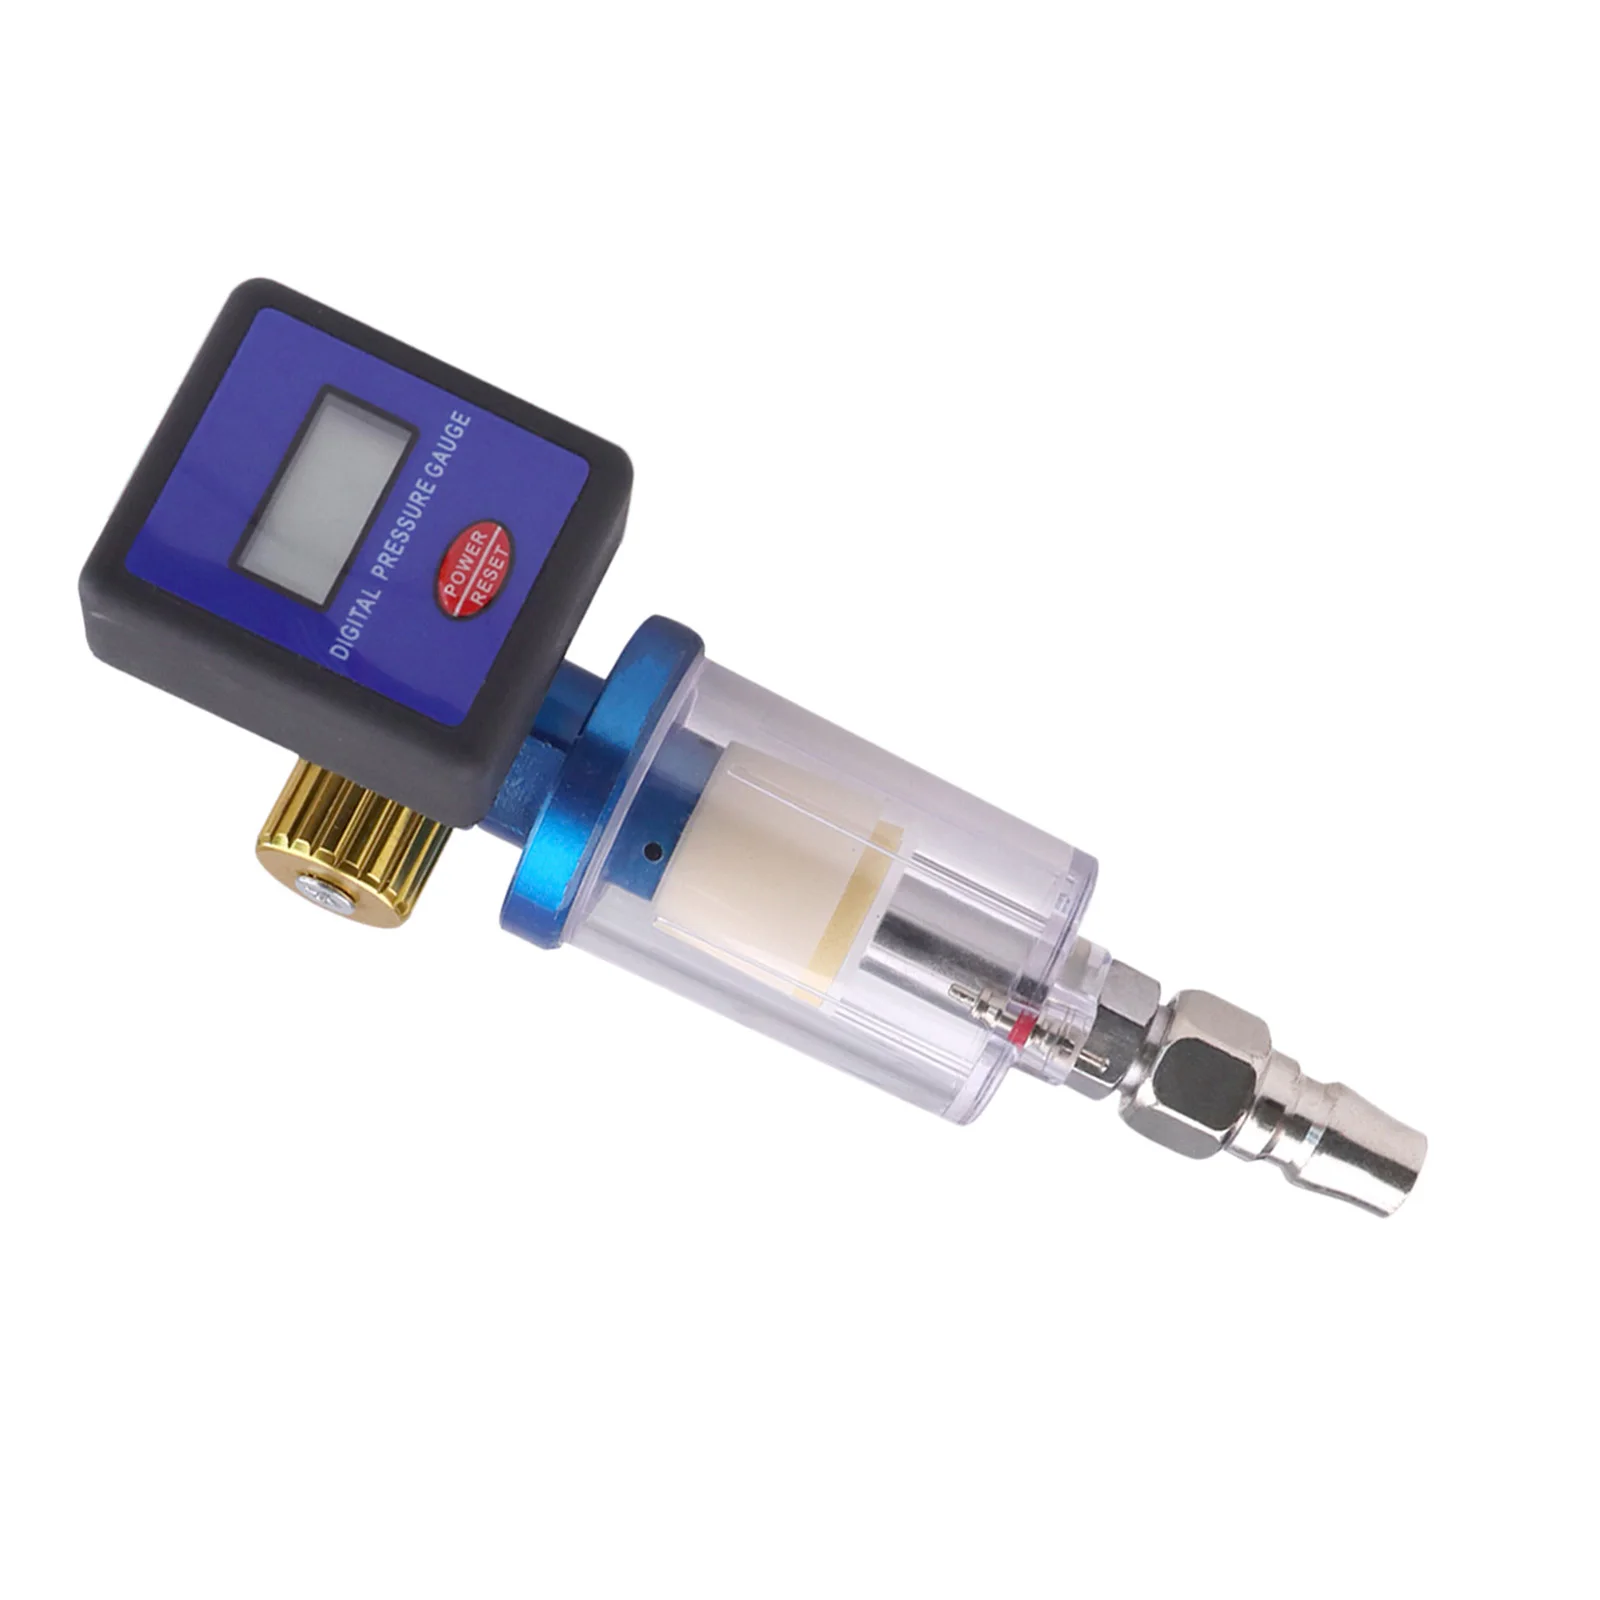  Regulator  + in-  Filter Pneumatic Tools Accessories for Airbrush